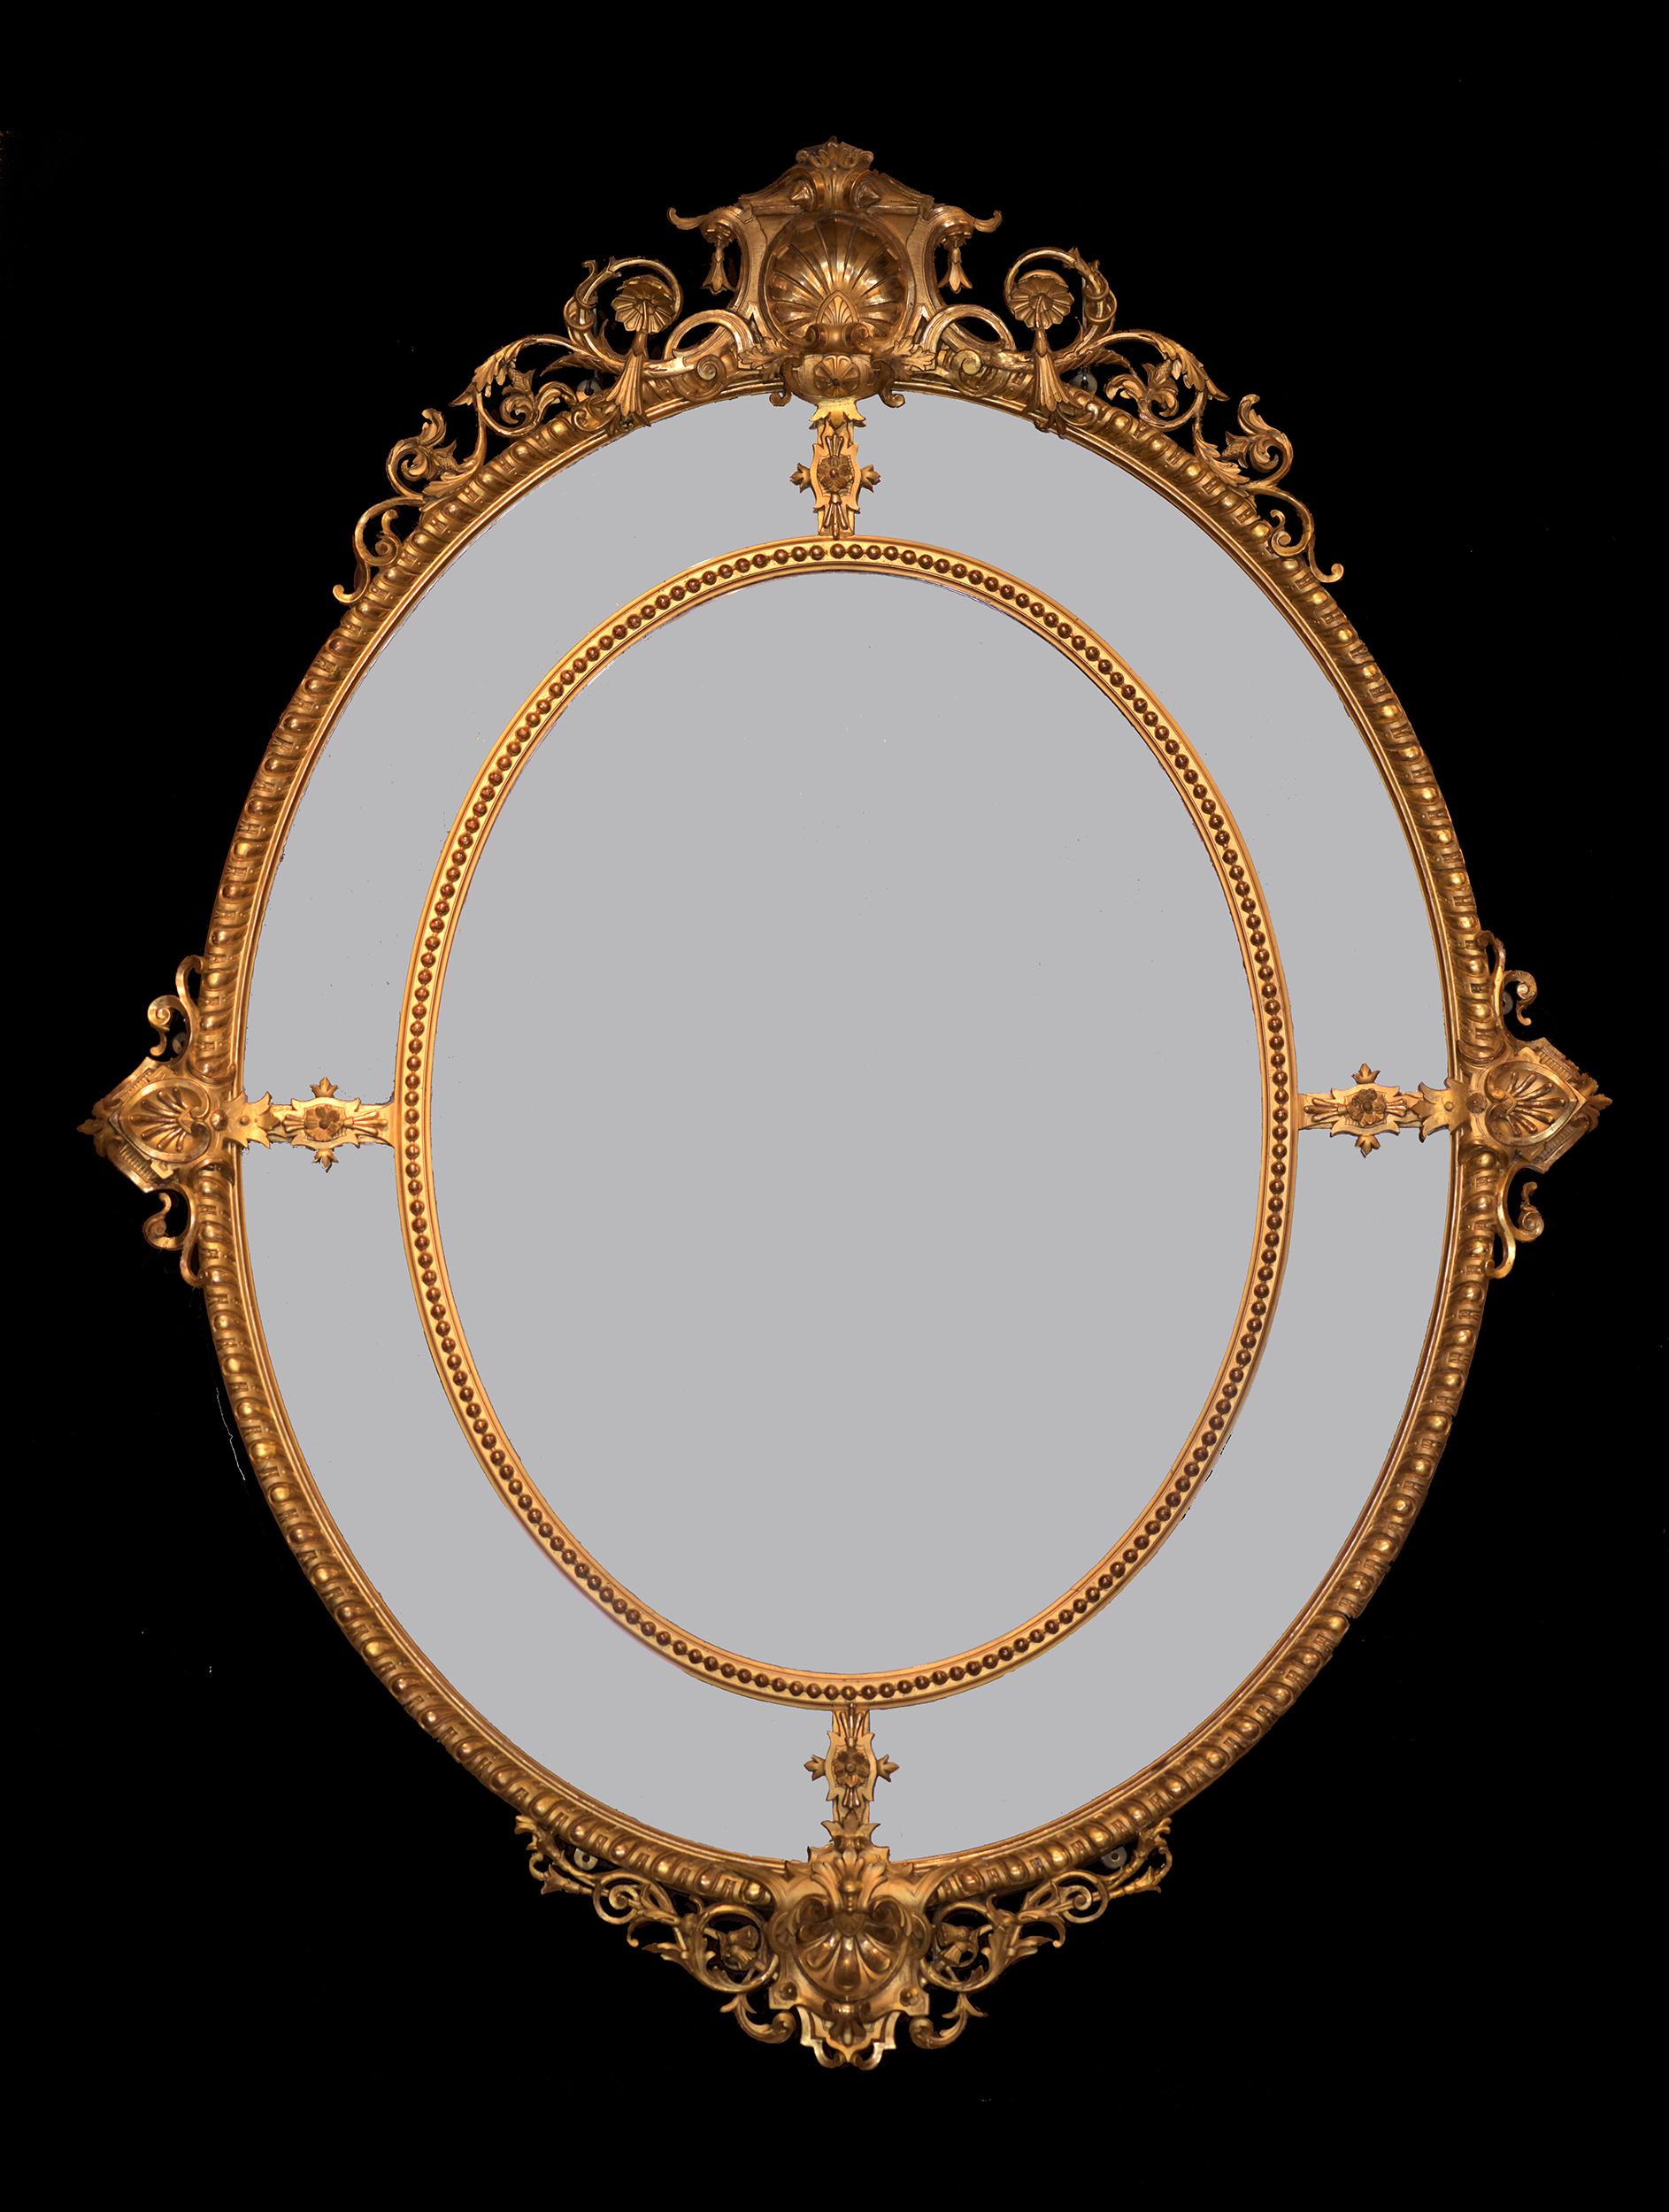 A magnificent French carved giltwood oval marginal wall mirror, of large proportions, surmounted by a shell and pierced foliage.

Circa 1870

French

Dimensions:

H: 74 1/2 in / 189 cm
W: 59 1/2 in / 151 cm